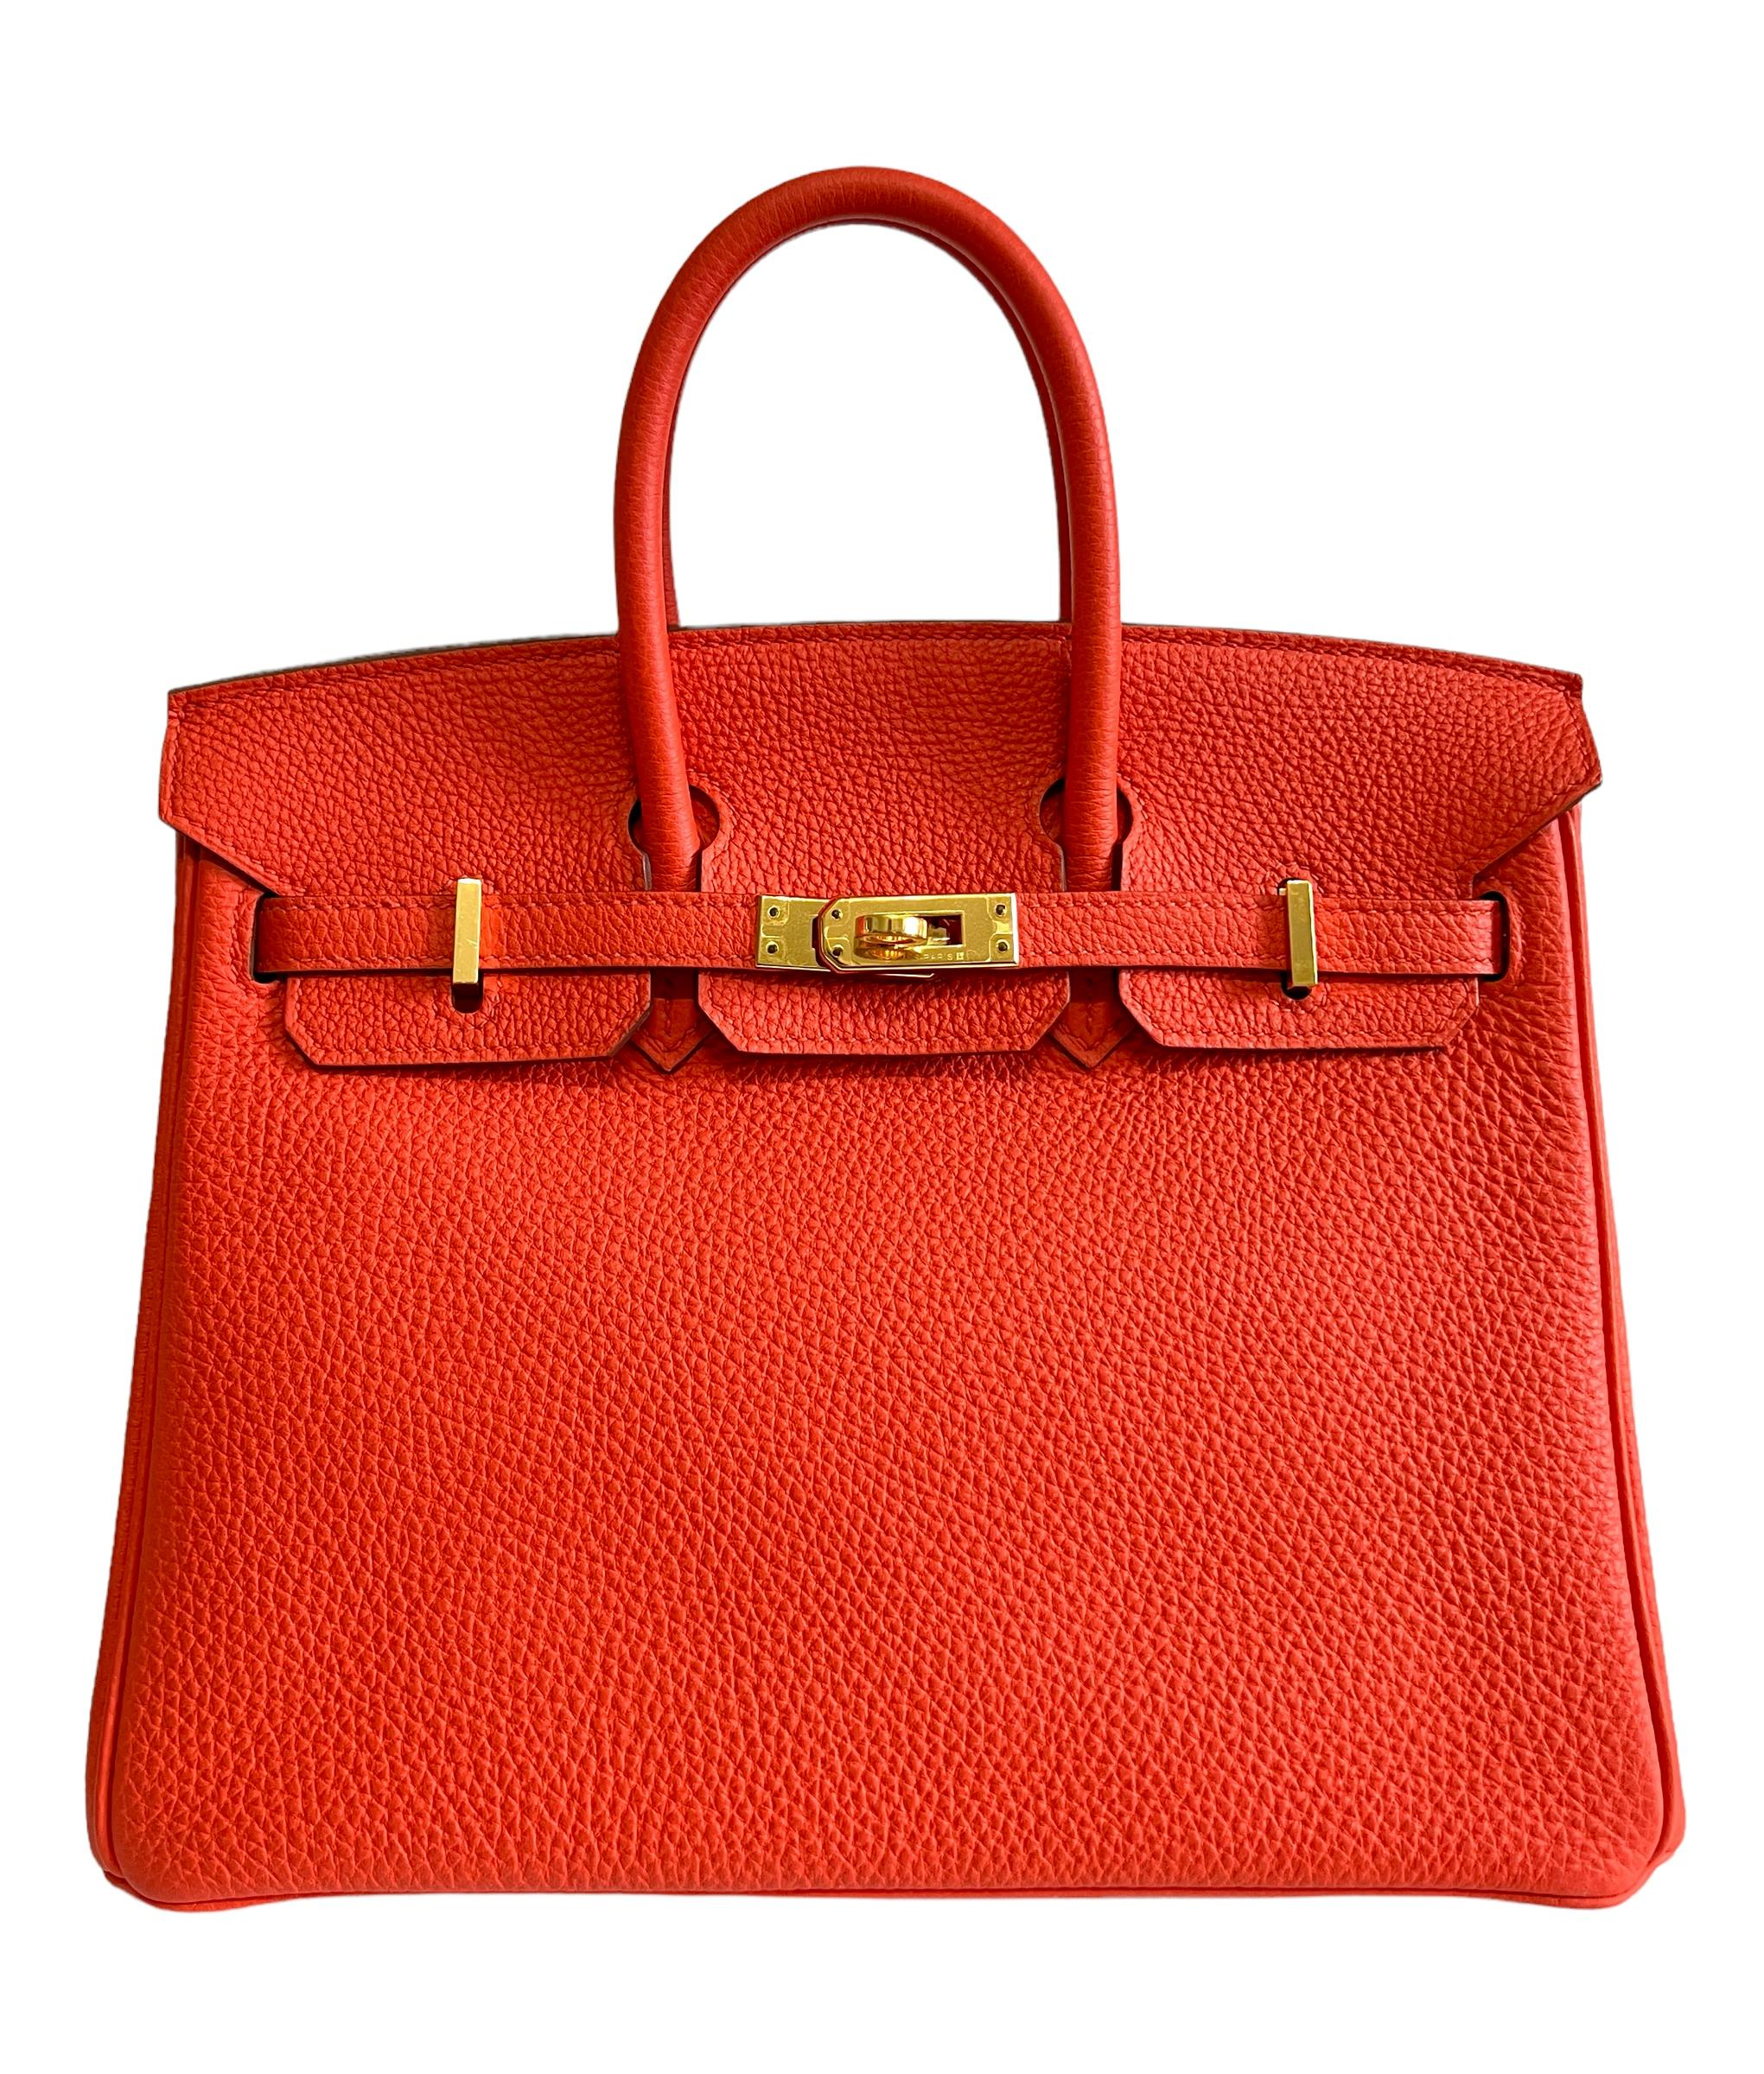 Stunning Rare Hermes Birkin 25 Poppy Orange Togo Leather Gold Hardware. Pristine Condition with Plastic on Hardware, perfect corners and structure. 2016 X Stamp. 

Shop With Confidence from Lux Addicts. Authenticity Guaranteed!